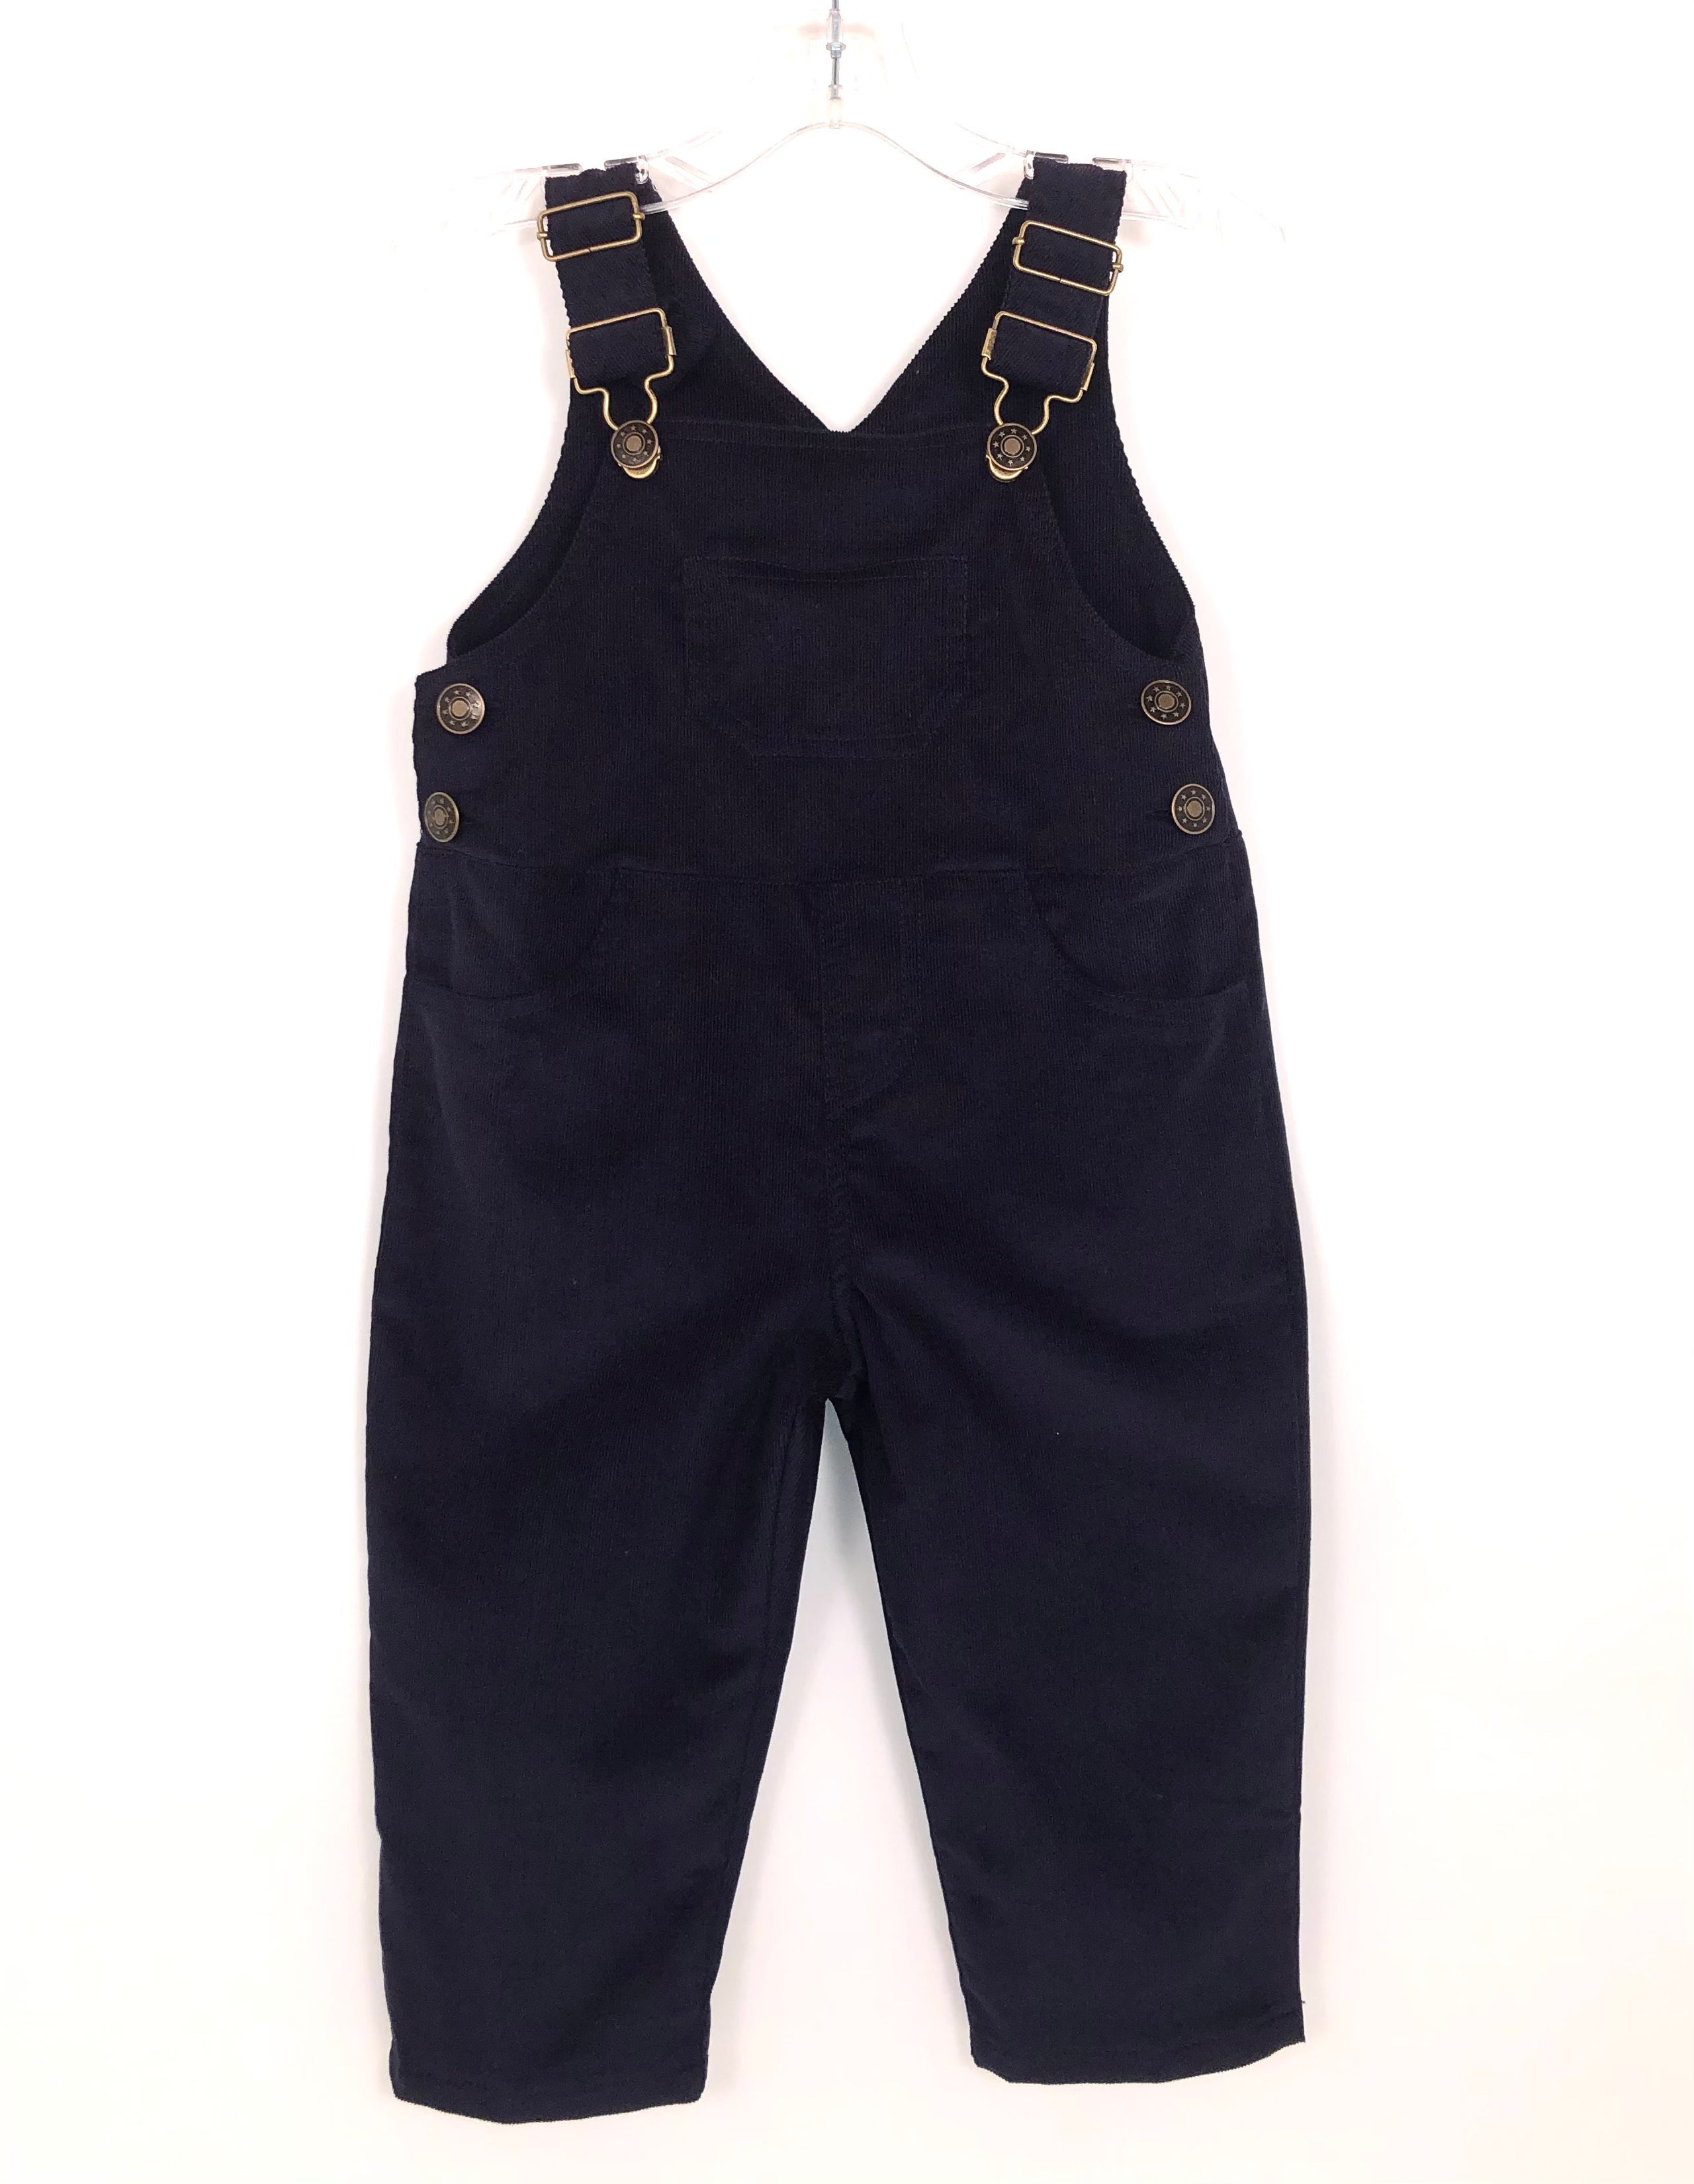 Busy Bees Blue Corduroy Overalls